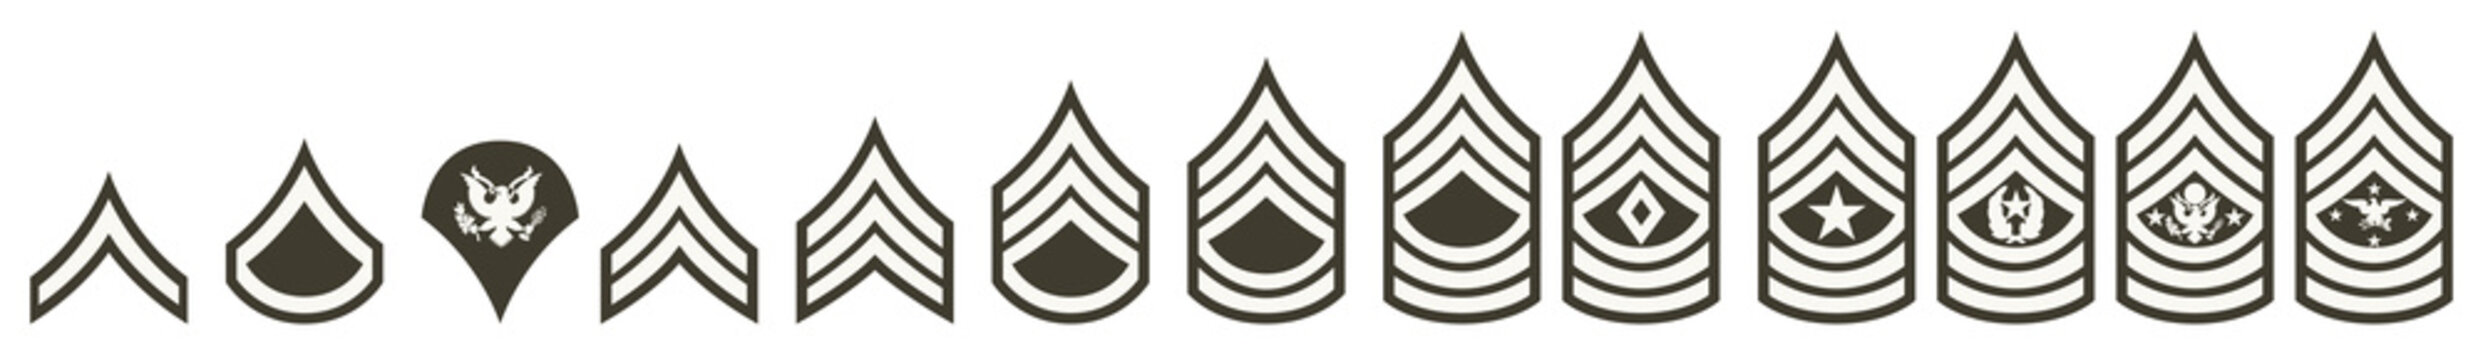 Vector military insignia of the United States Army